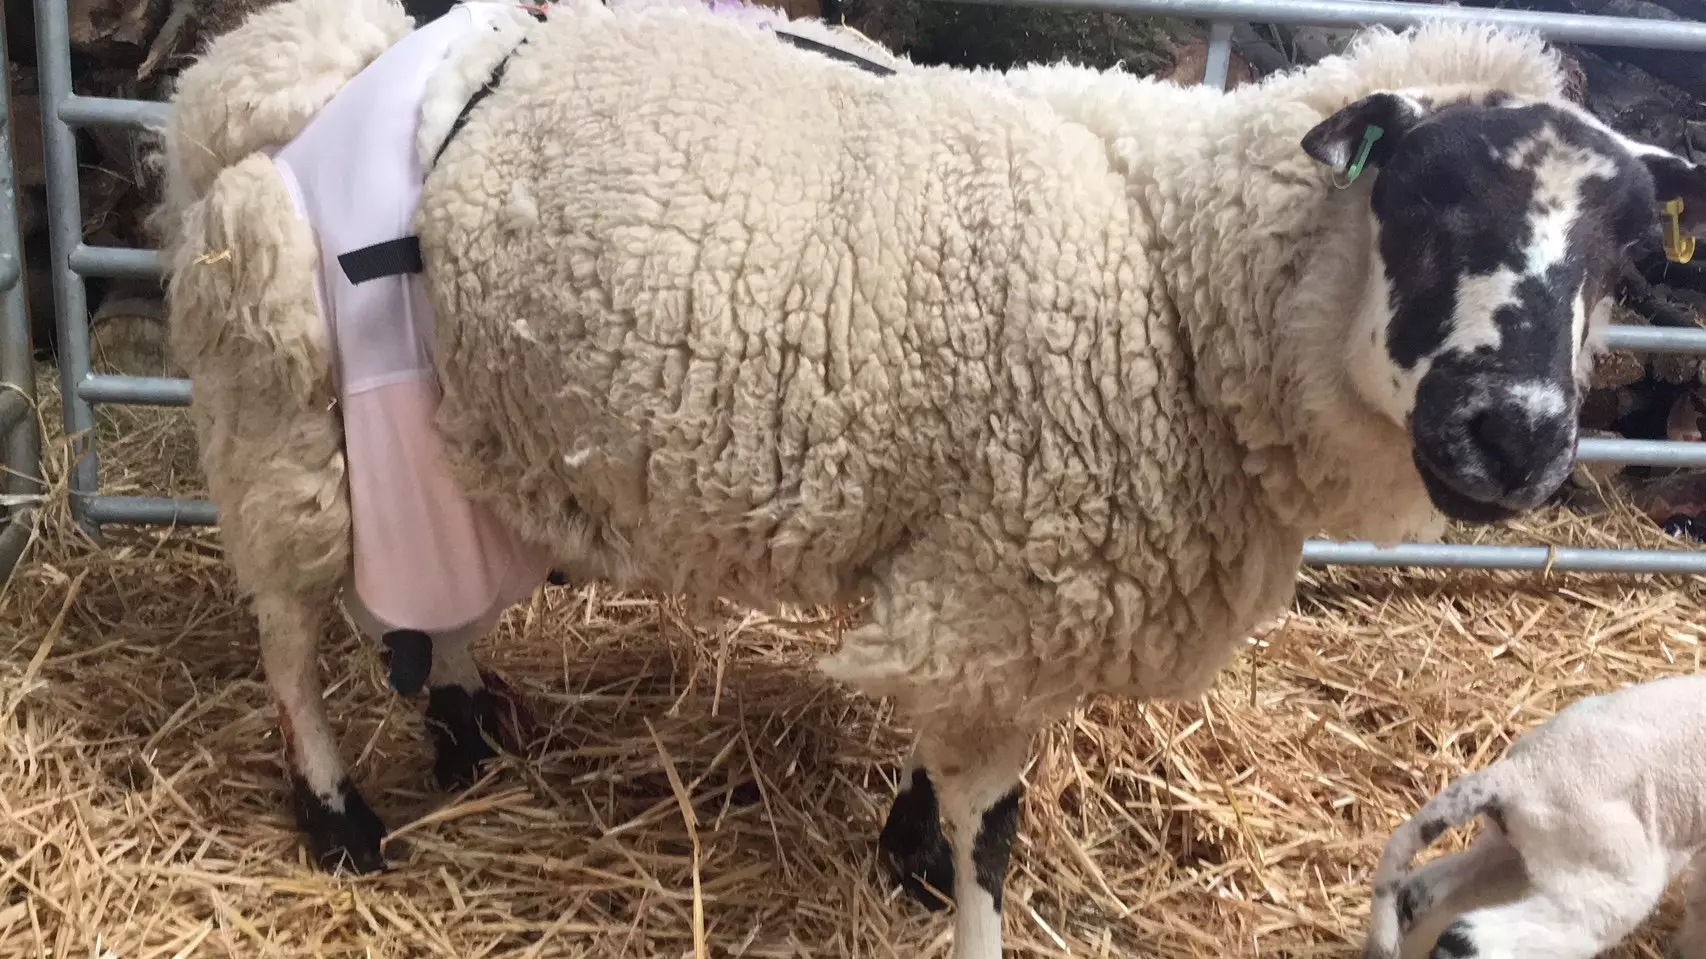 Barbra The Sheep Has To Wear DD Bra To Support Her Udders